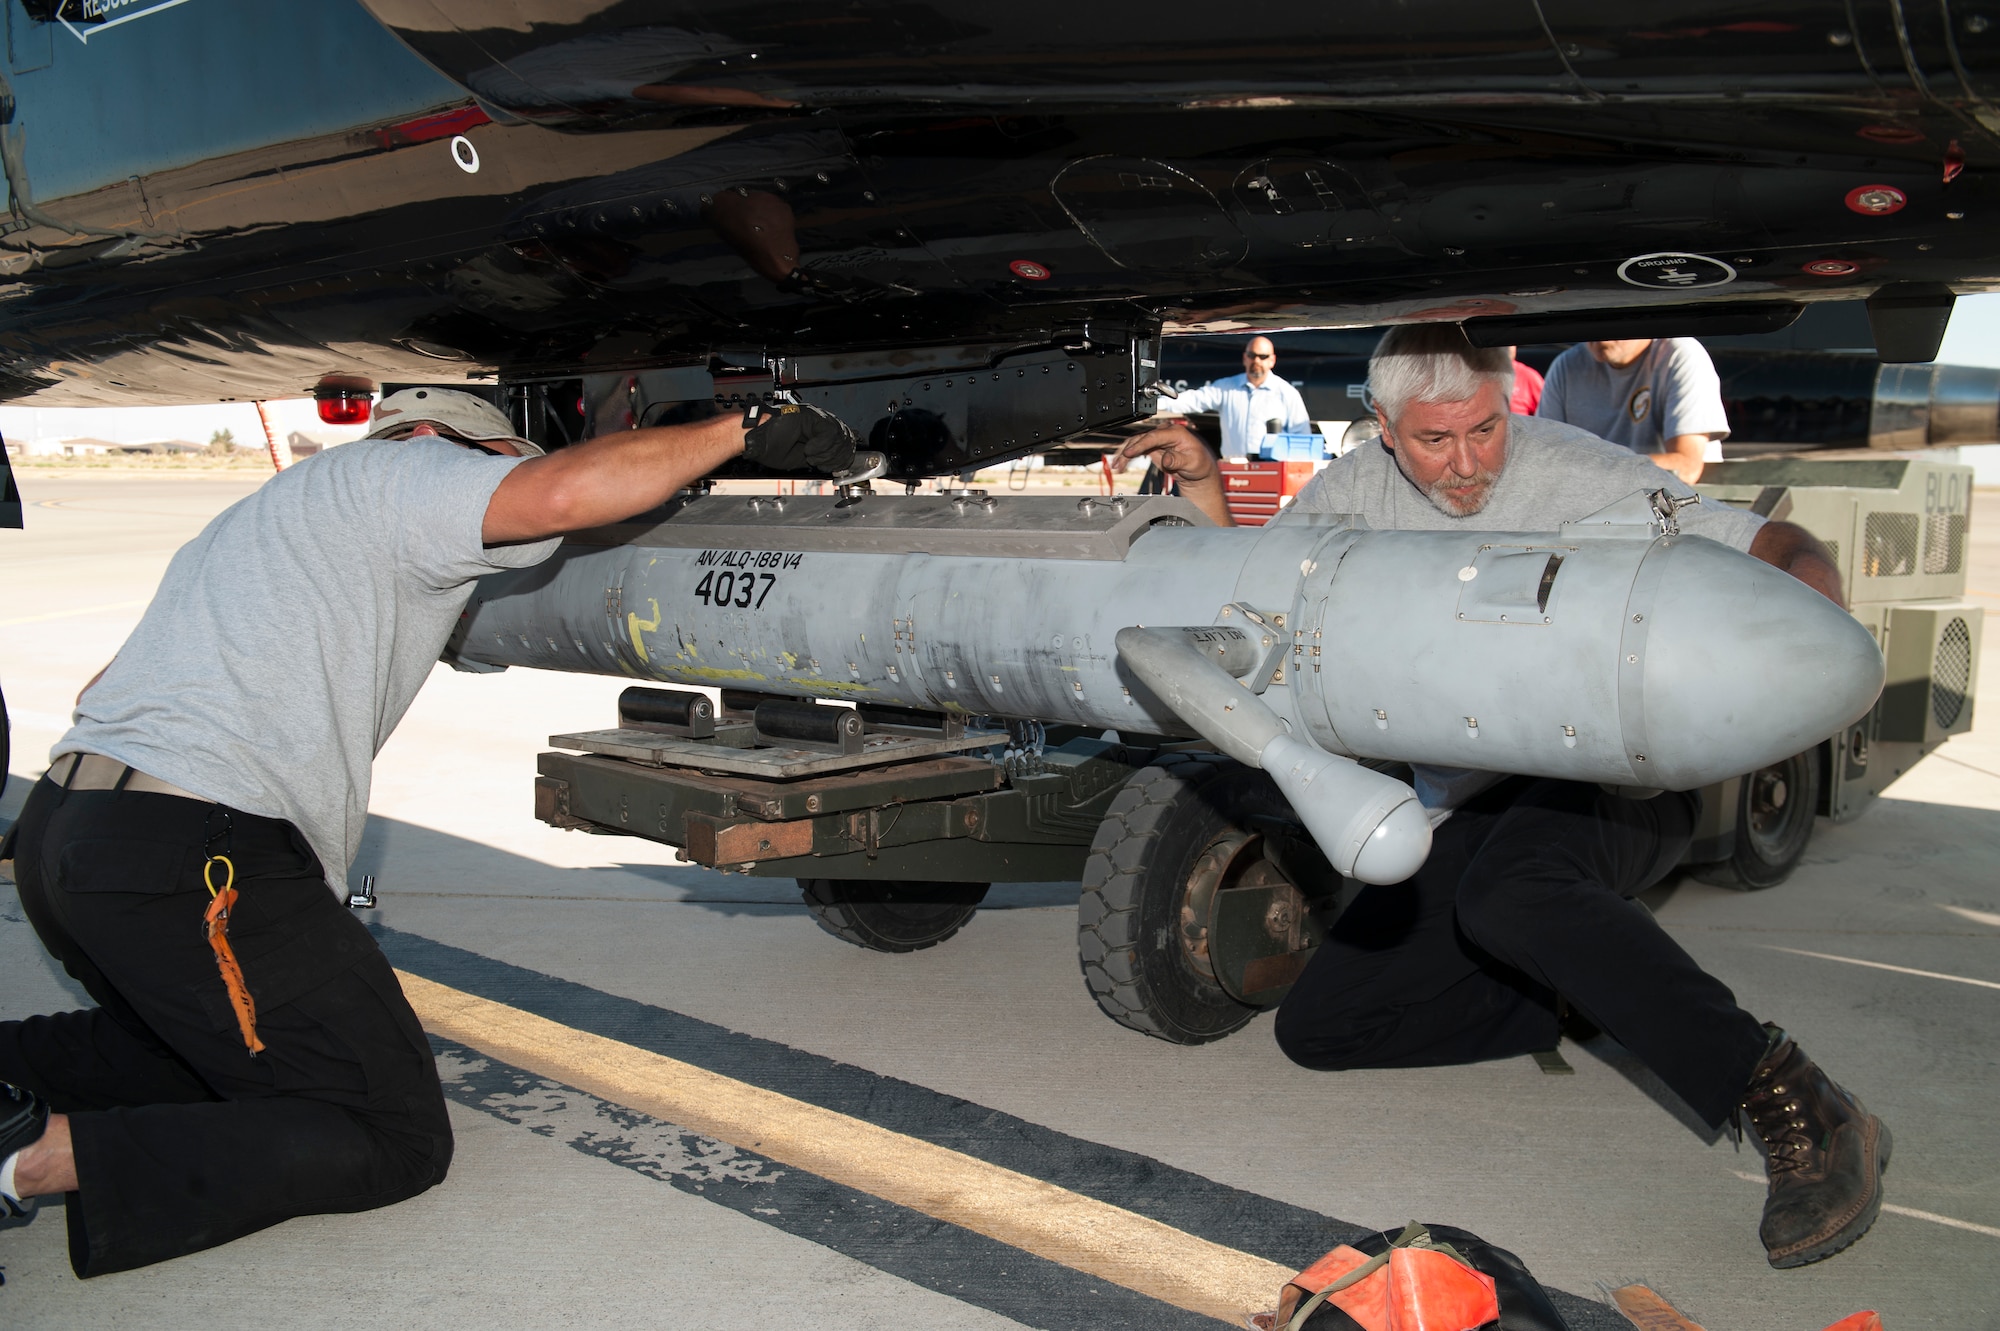 Ronald Legand, and Jeremy Hale, both M1 Support Services maintainers, attach a radar jammer pod onto a T-38 Talon at Holloman Air Force Base, N.M., Jun 4. For the first time, the T-38 has been modified to fit the ALQ-188 pod for use as a radar jammer. This newest addition to the T-38 will assist in its training mission by making it a more effective adversary for the F-22 Raptor during simulated combat exercises. (U.S. Air Force photo by Airman 1st Class Daniel E. Liddicoet/Released)